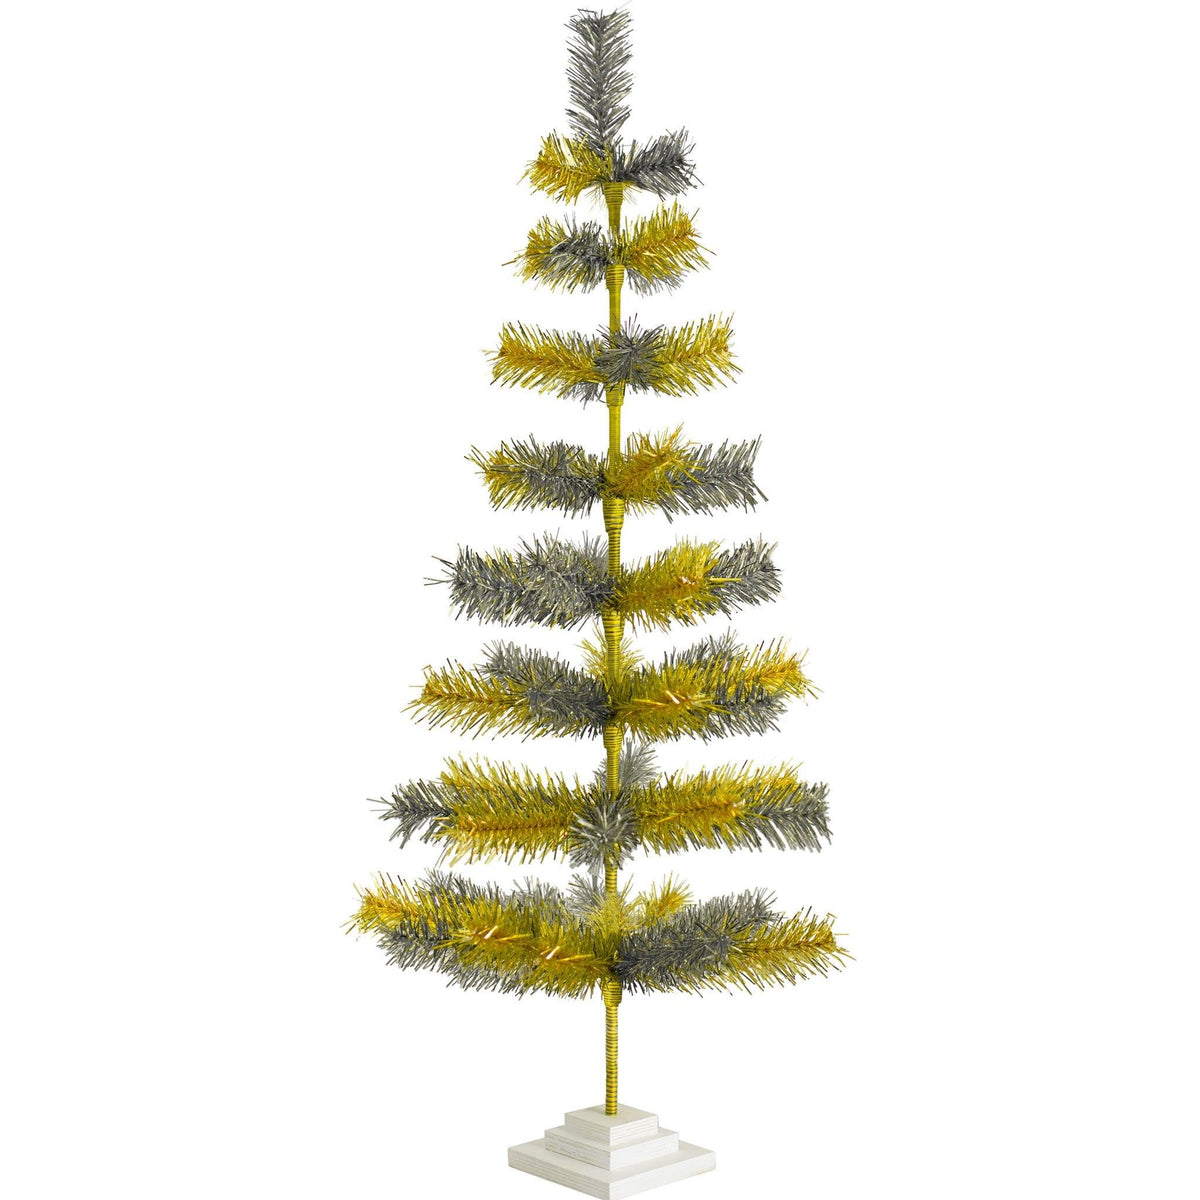 48in gold and silver multicolor tinsel christmas trees sold at leedisplay.com